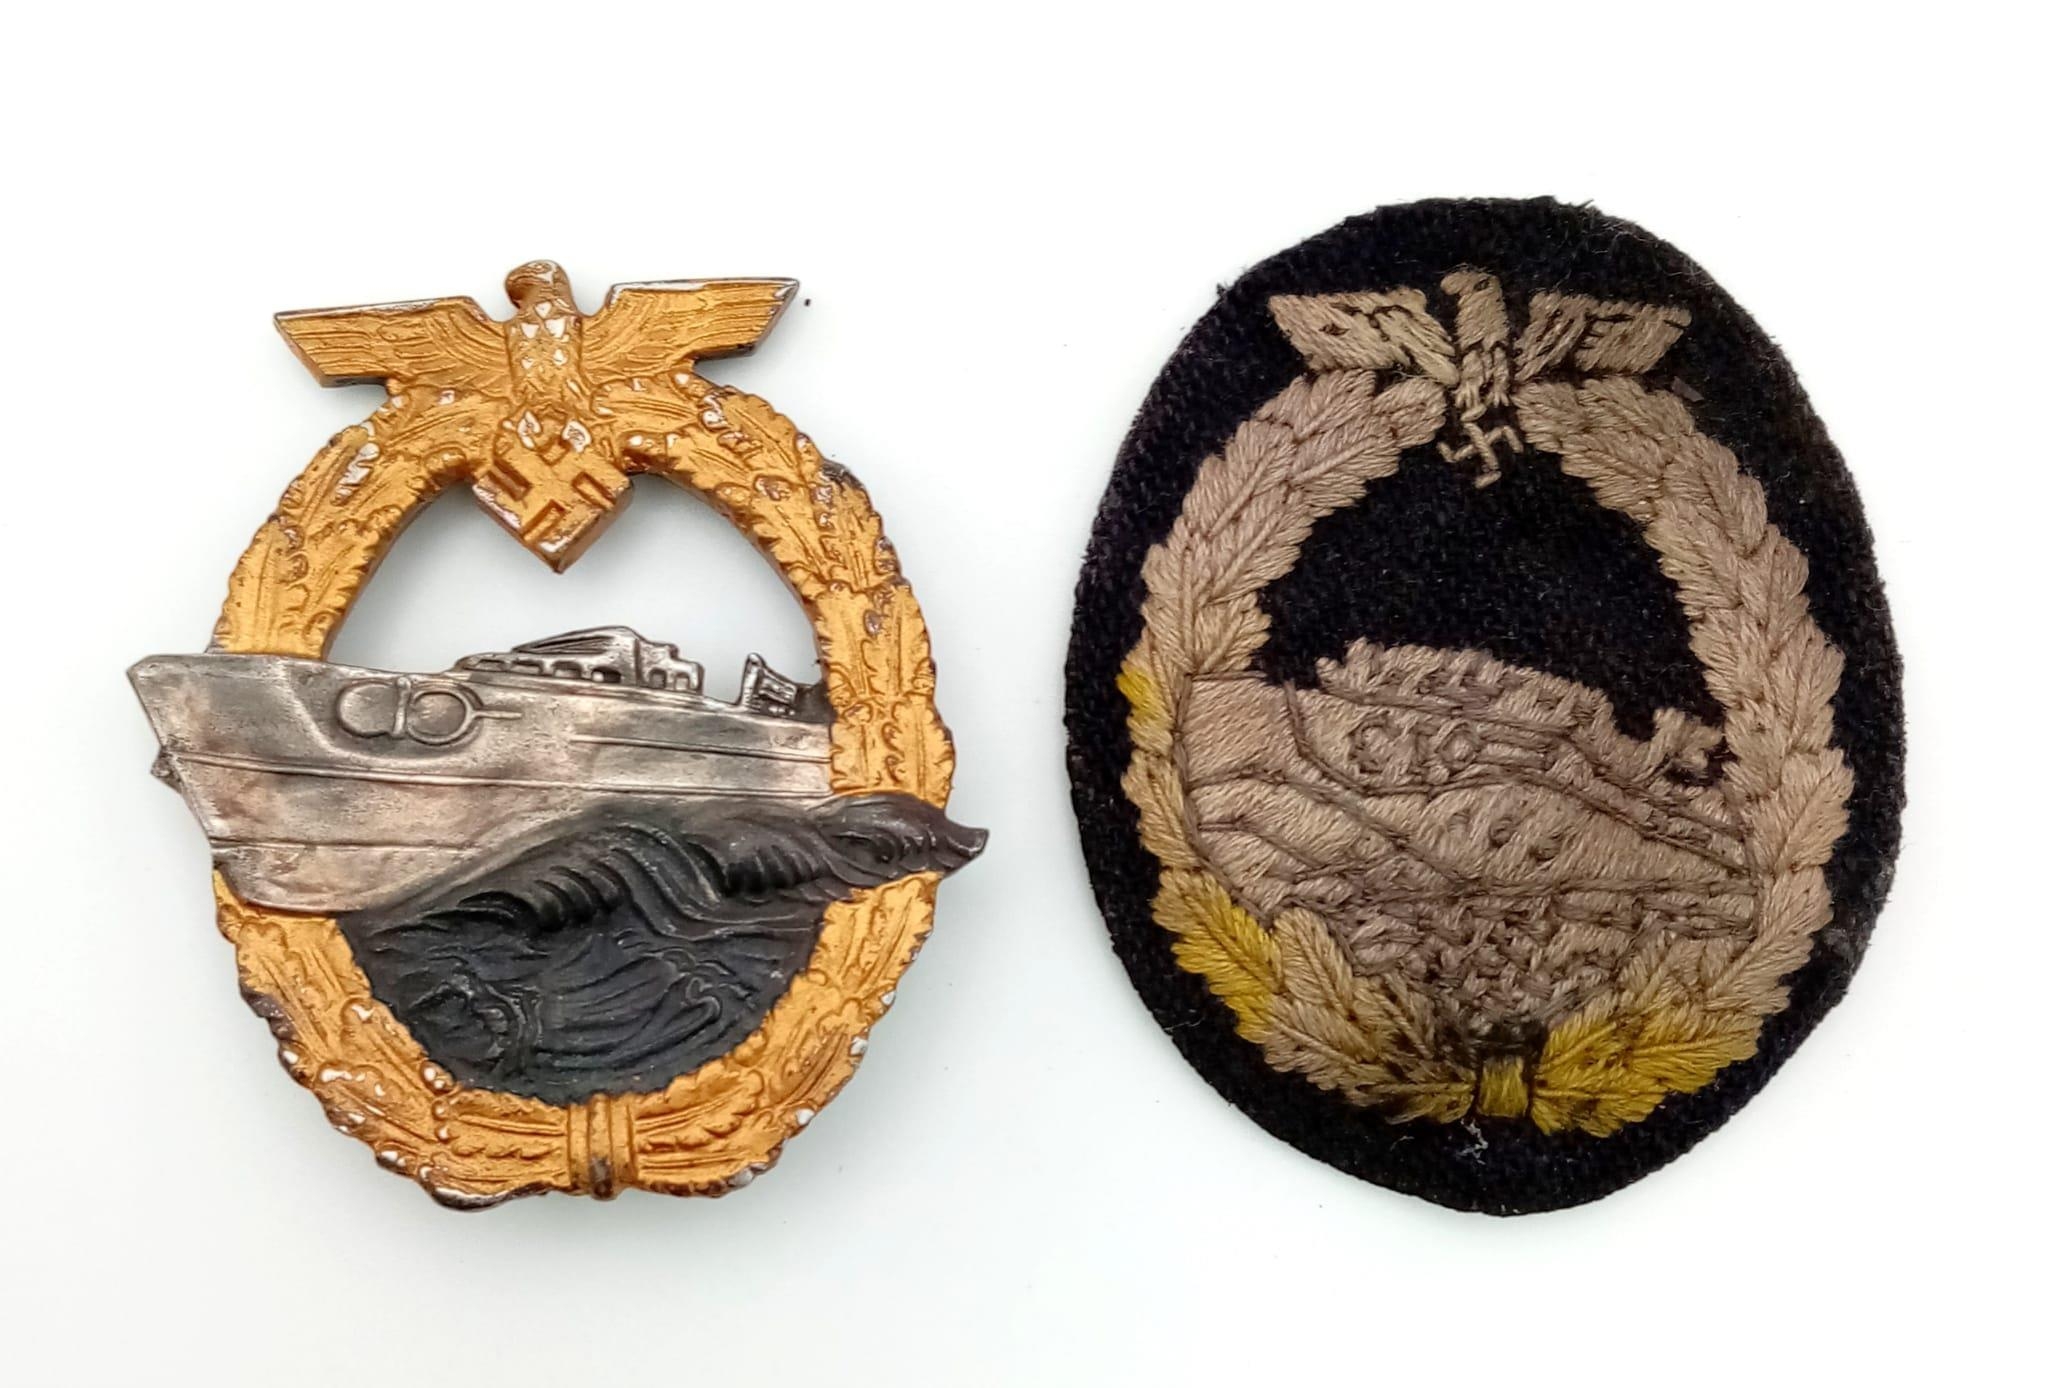 WW2 German 3 rd Reich Kriegsmarine “Schnell Boat” (Fast Torpedo Boat) Qualification badge in painted